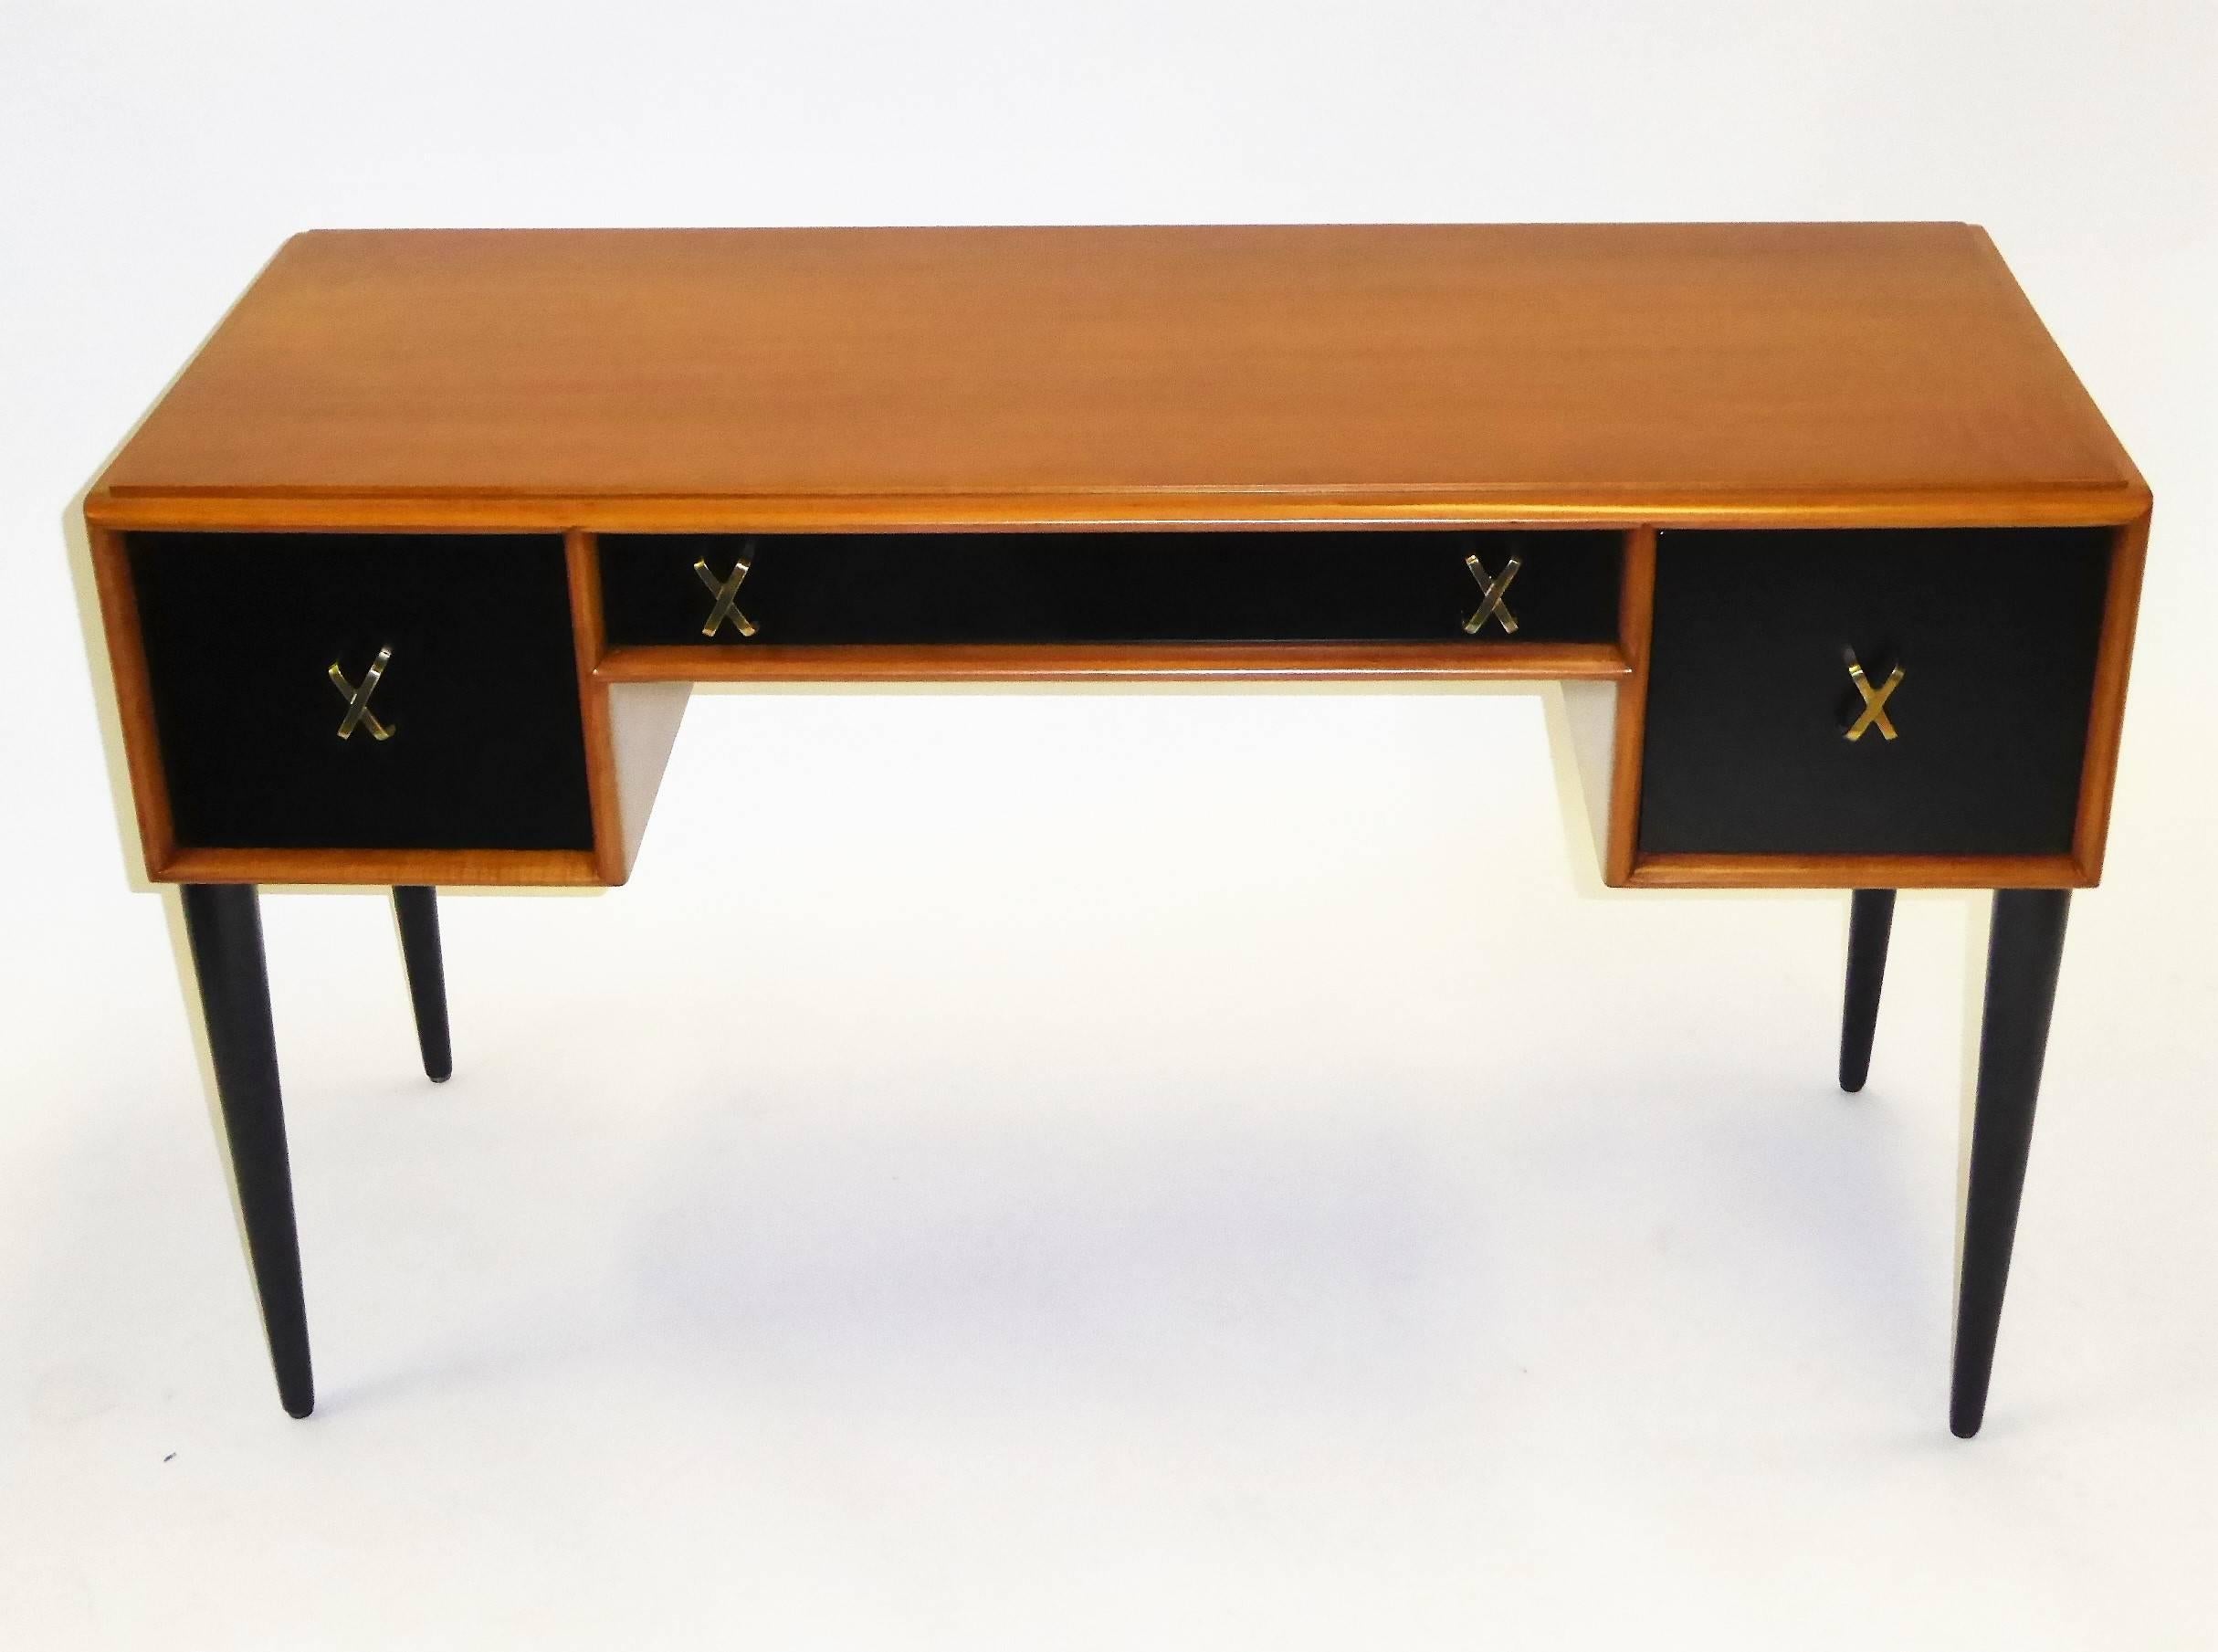 Rarely seen exquisite Paul Frankl designed mid century modern desk or vanity in cherry and black satin lacquer with brass X-pulls. With a John Stuart store tag and made by Johnson Furniture Company in the early 1950s. Beautiful figured wood, finely